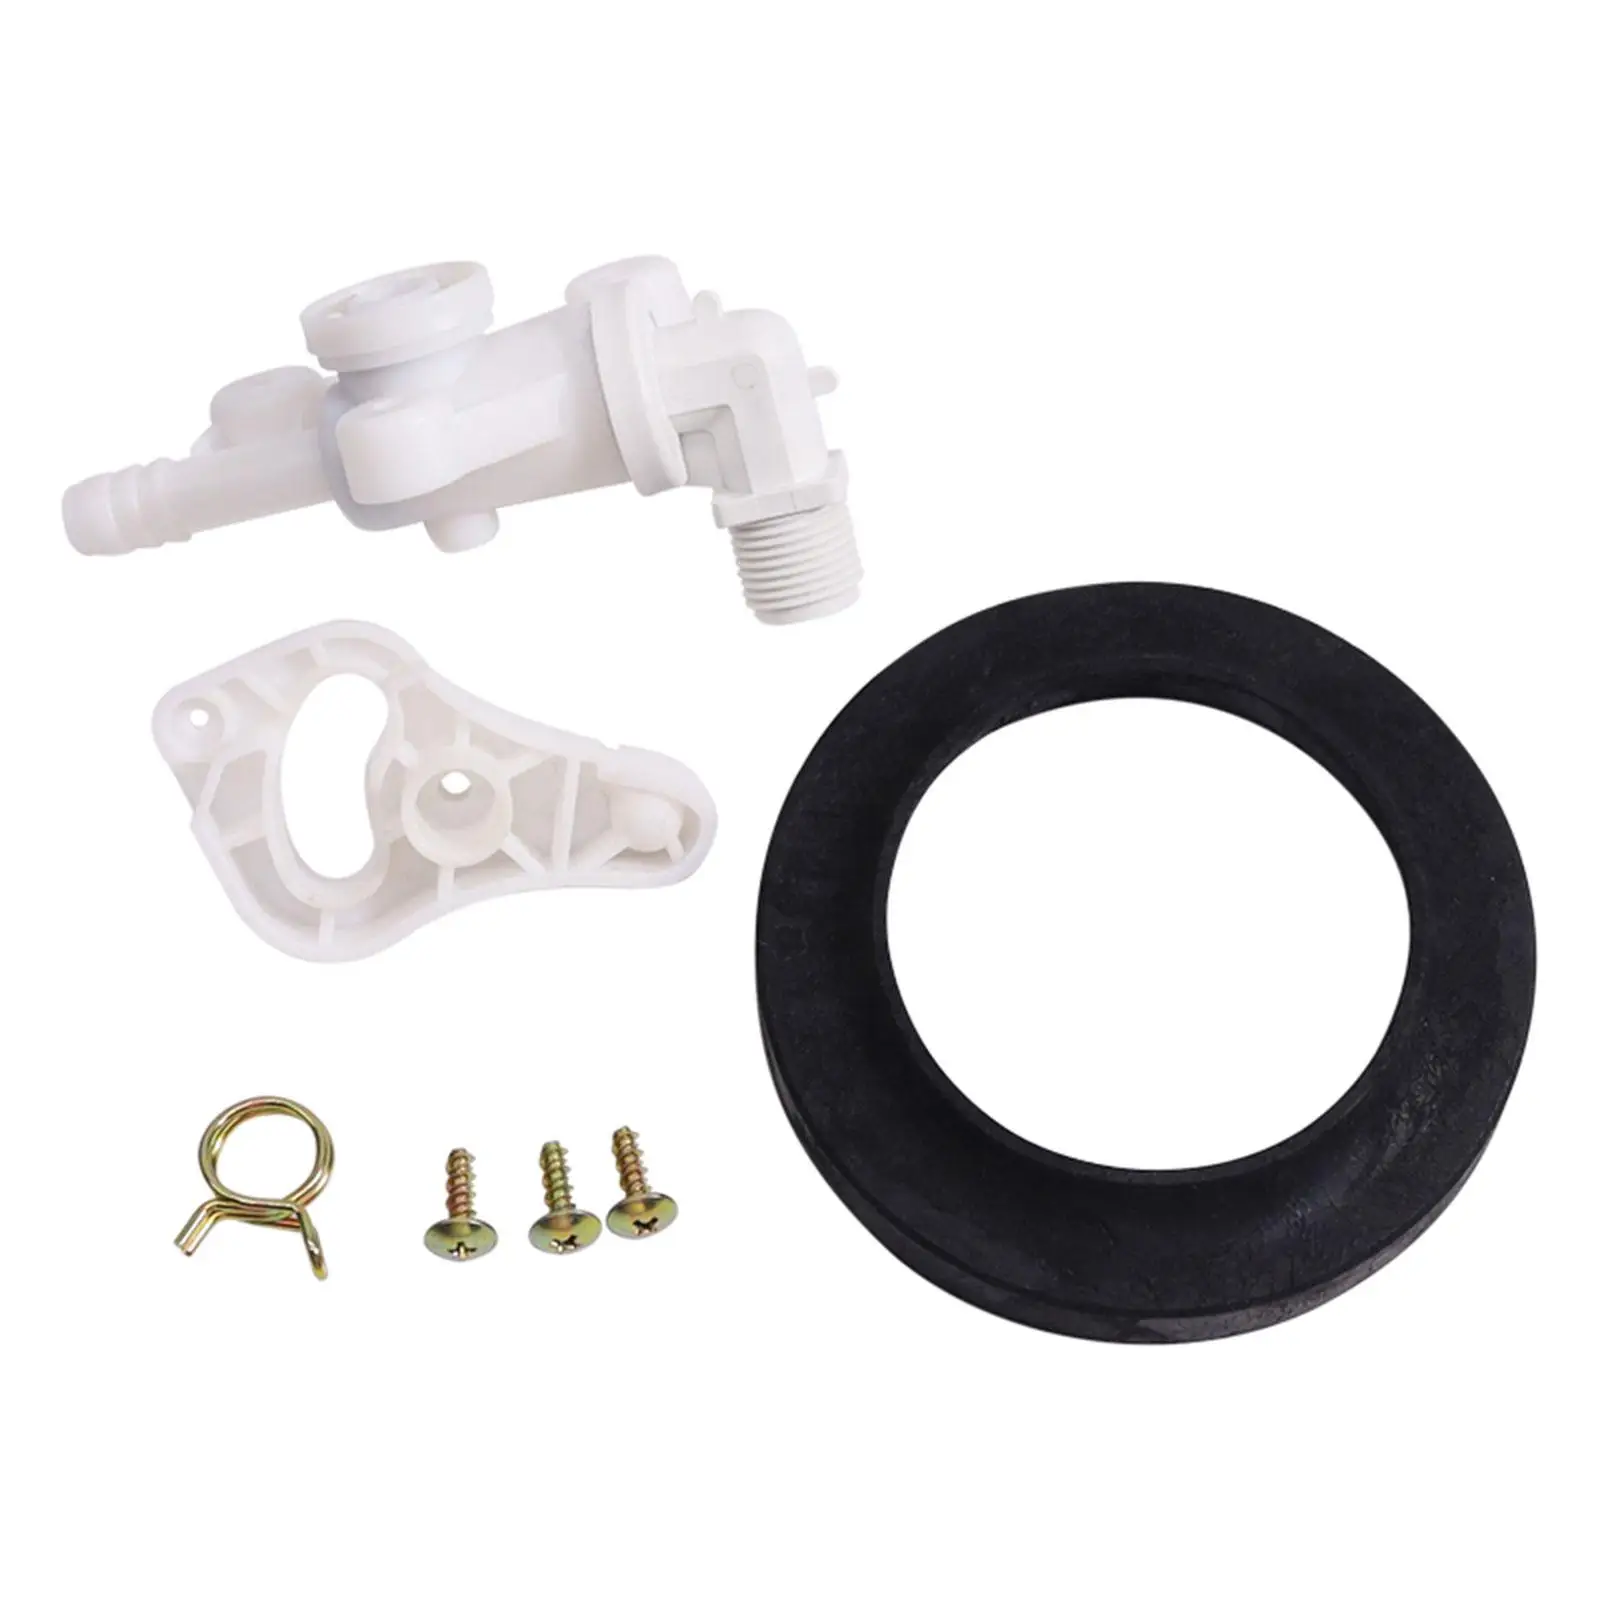 34100 RV Water Valve for Style Lite Toilets Accessory Replacements for Durable Easy to Install Convenient Practical